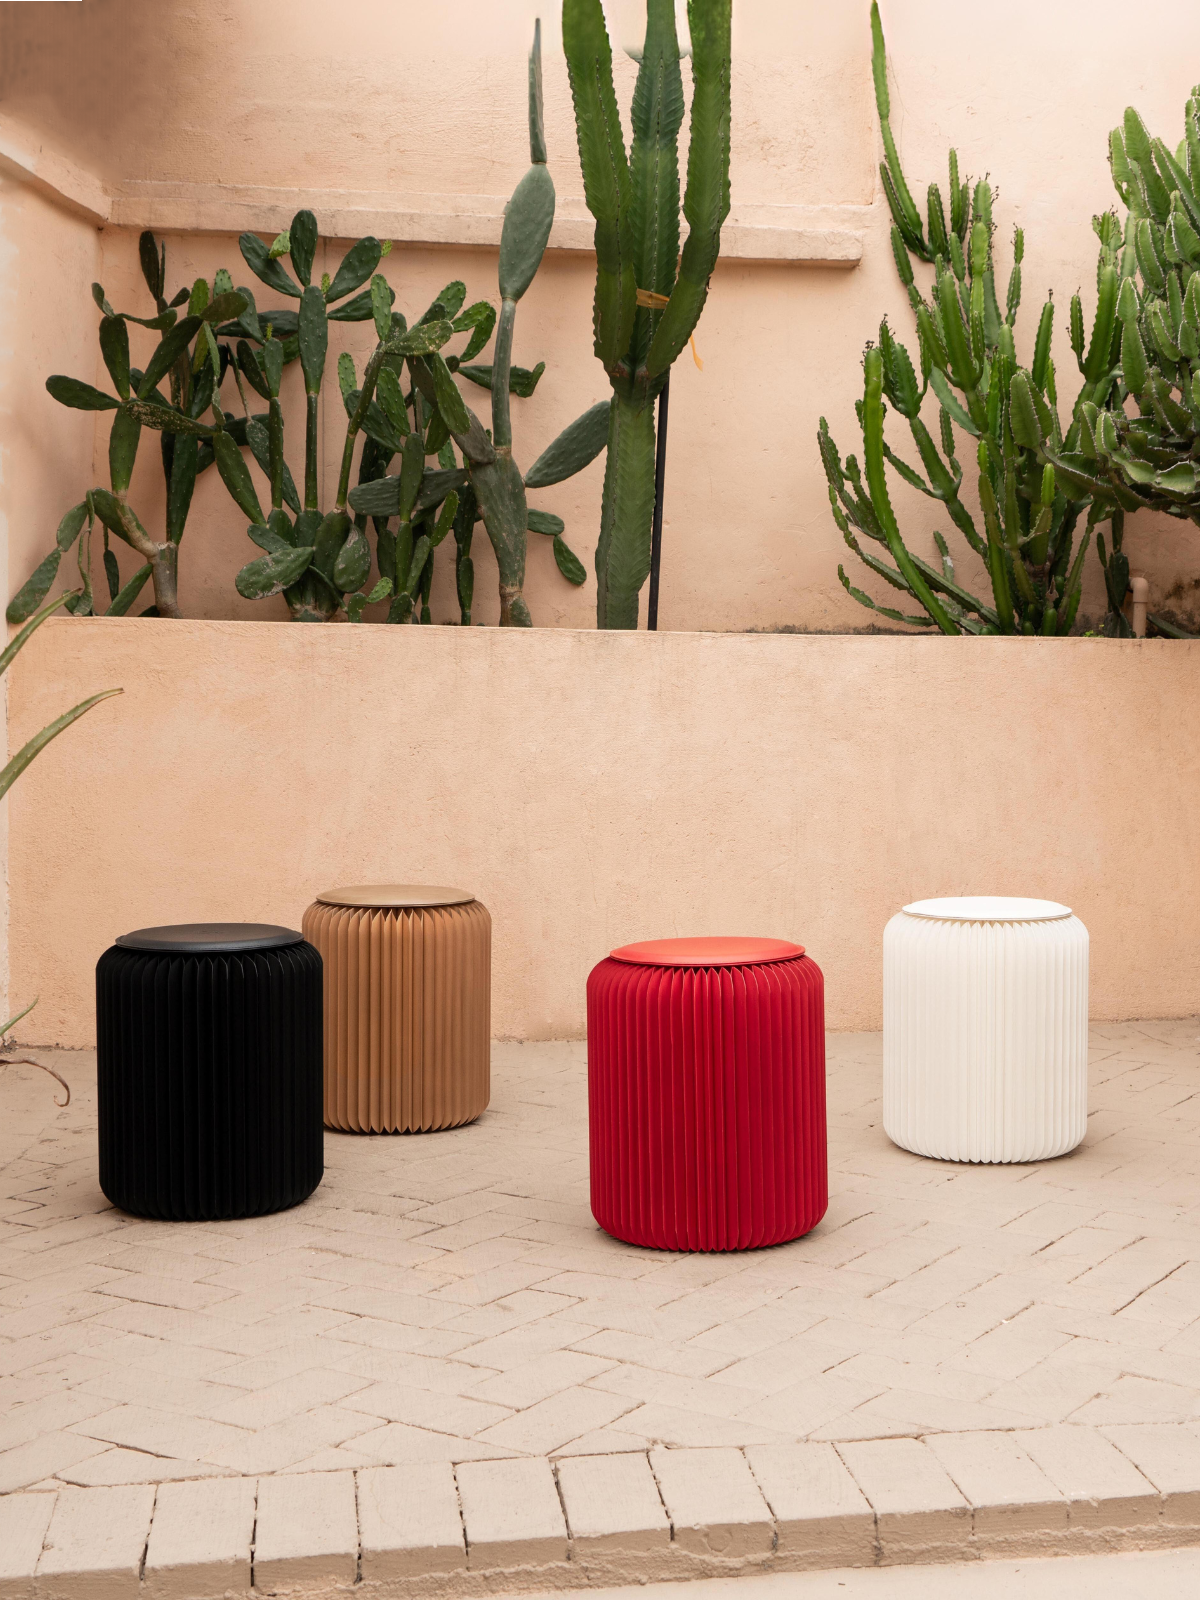 4 foldable stools among plants eco-friendly-black-brown-red-white